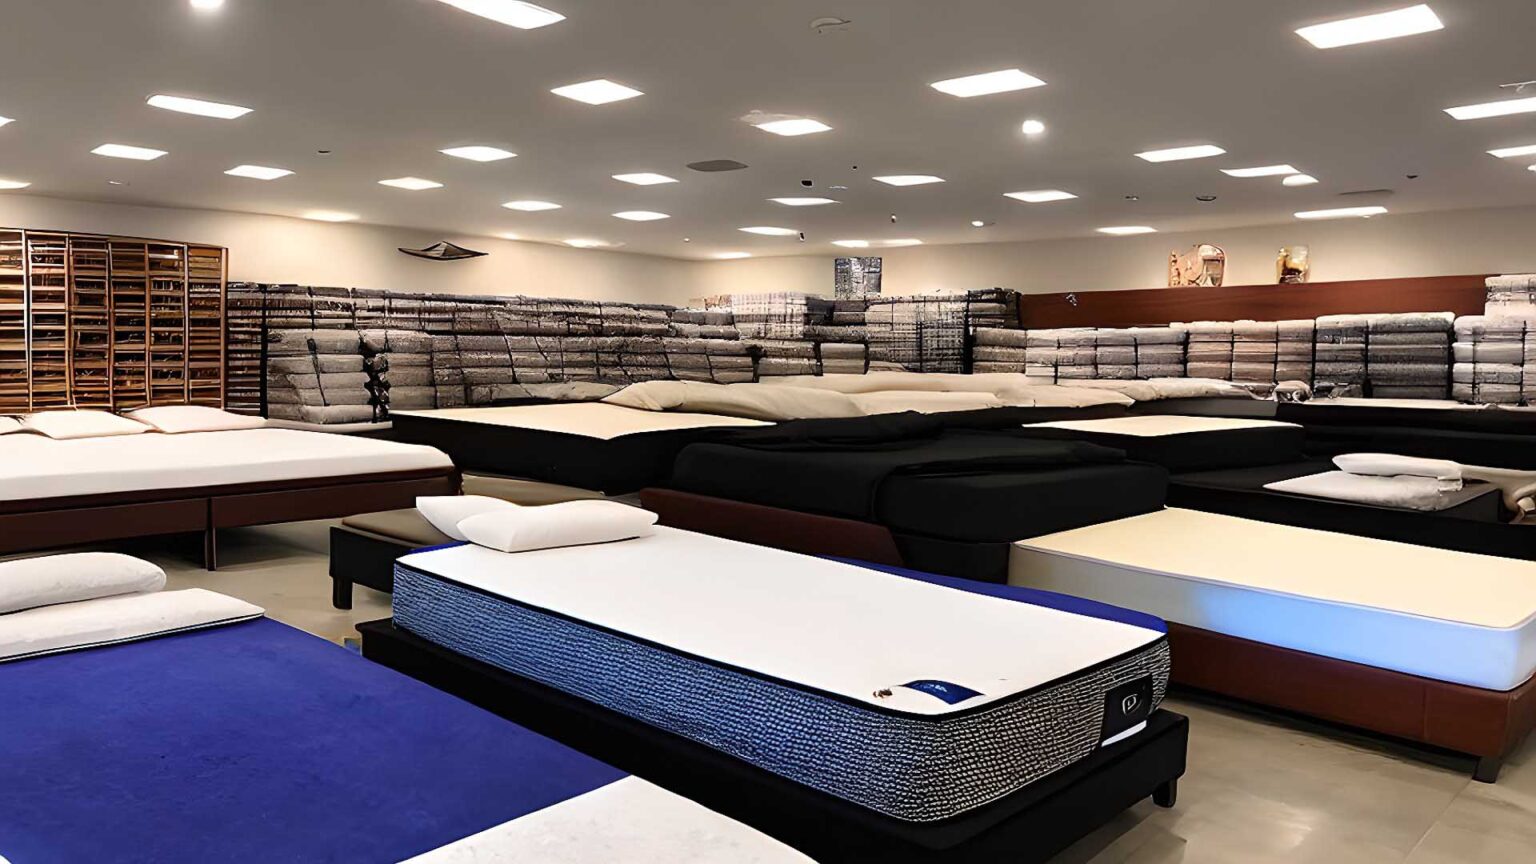 Mattress Stores, mattress dealers, and mattress retailers near me in Roswell, NM